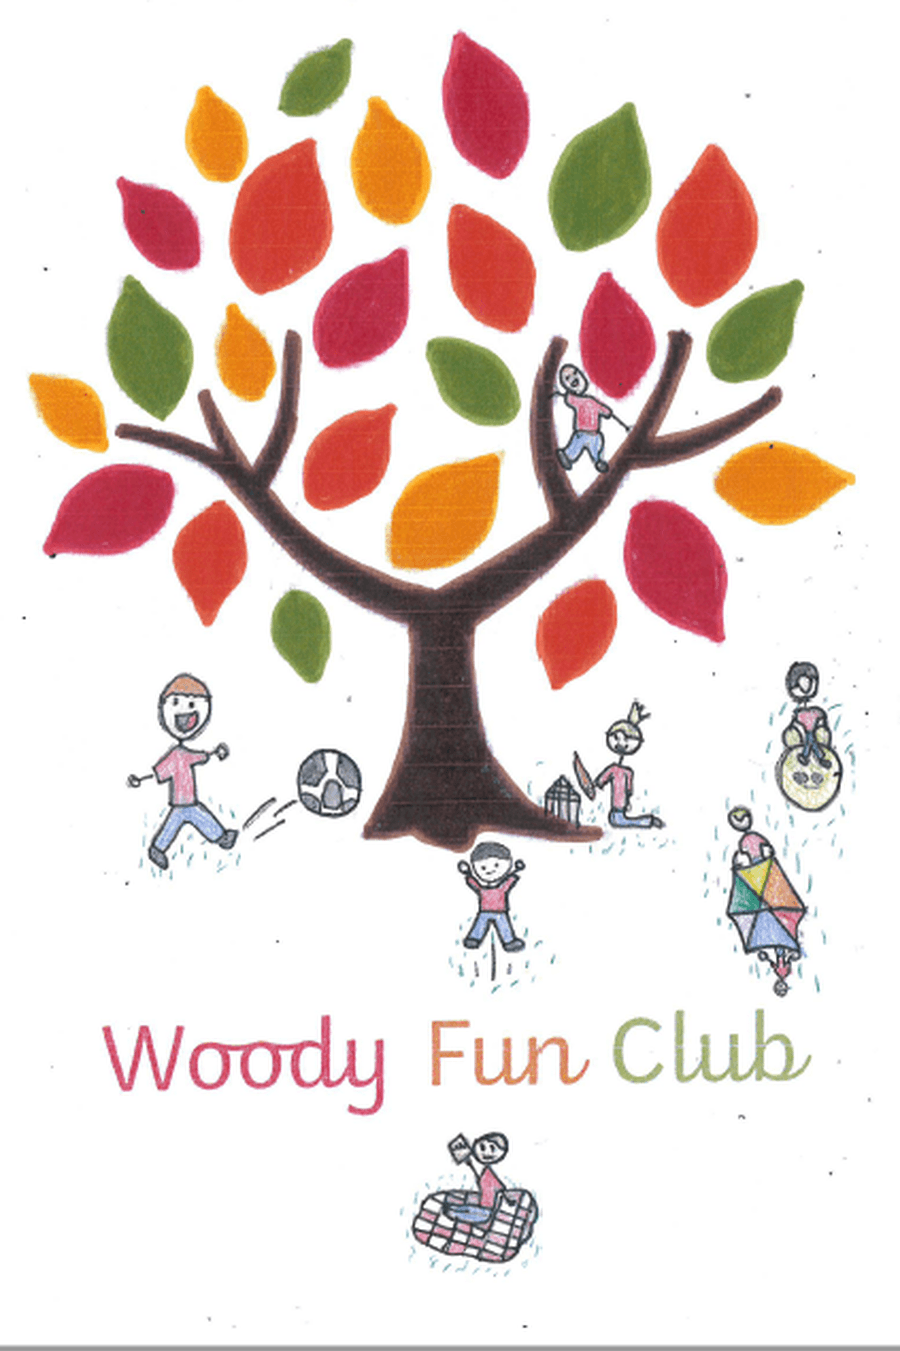 Welcome to Woodlesford Primary School - Woody Fun Club